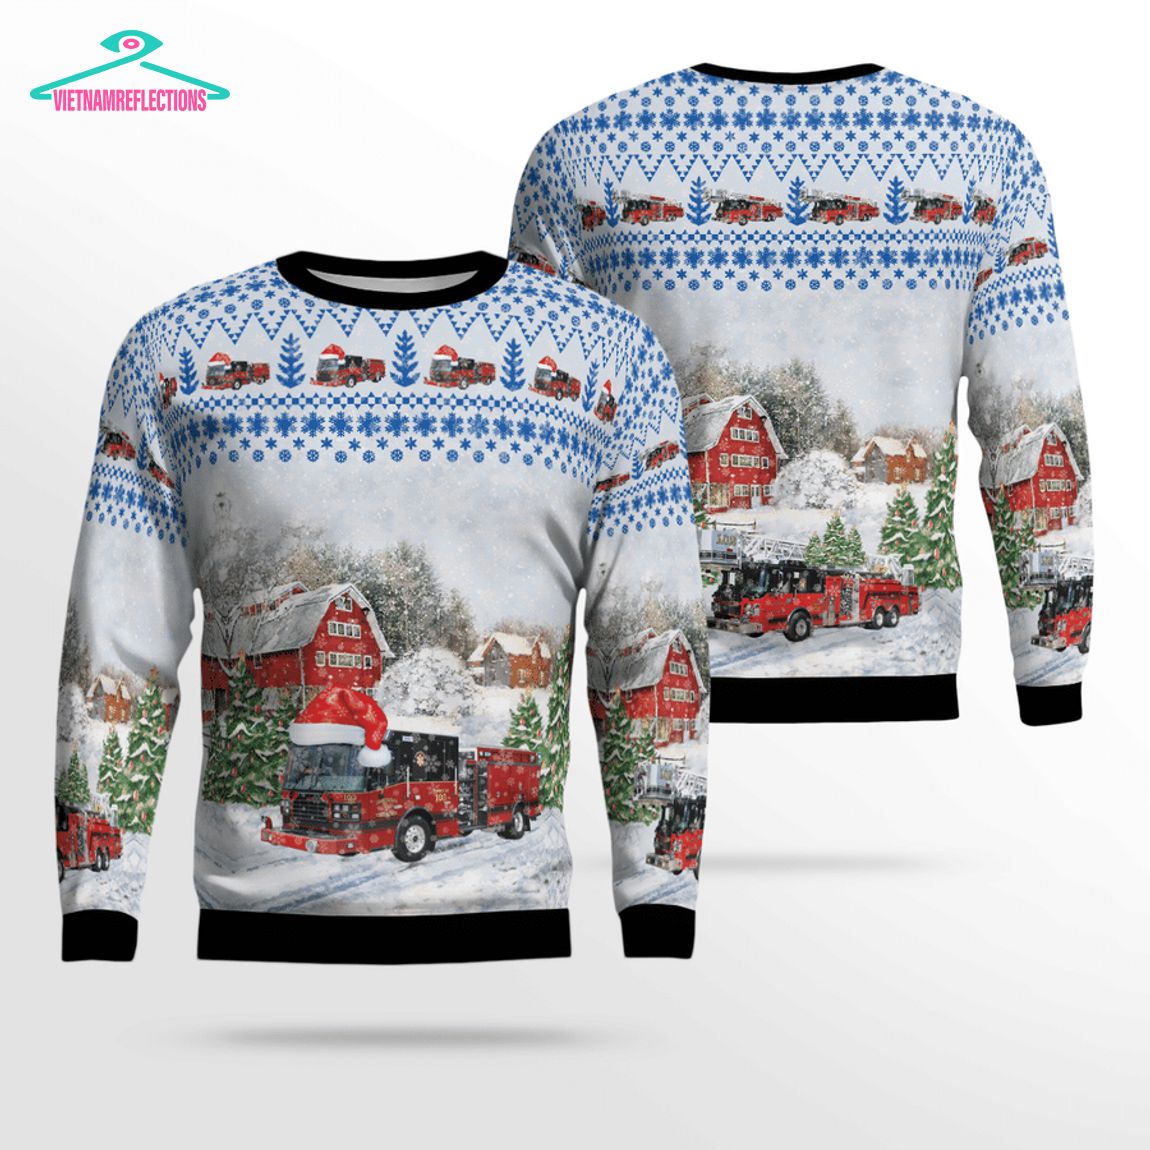 illinois-downers-grove-fire-department-3d-christmas-sweater-1-5IsXG.jpg